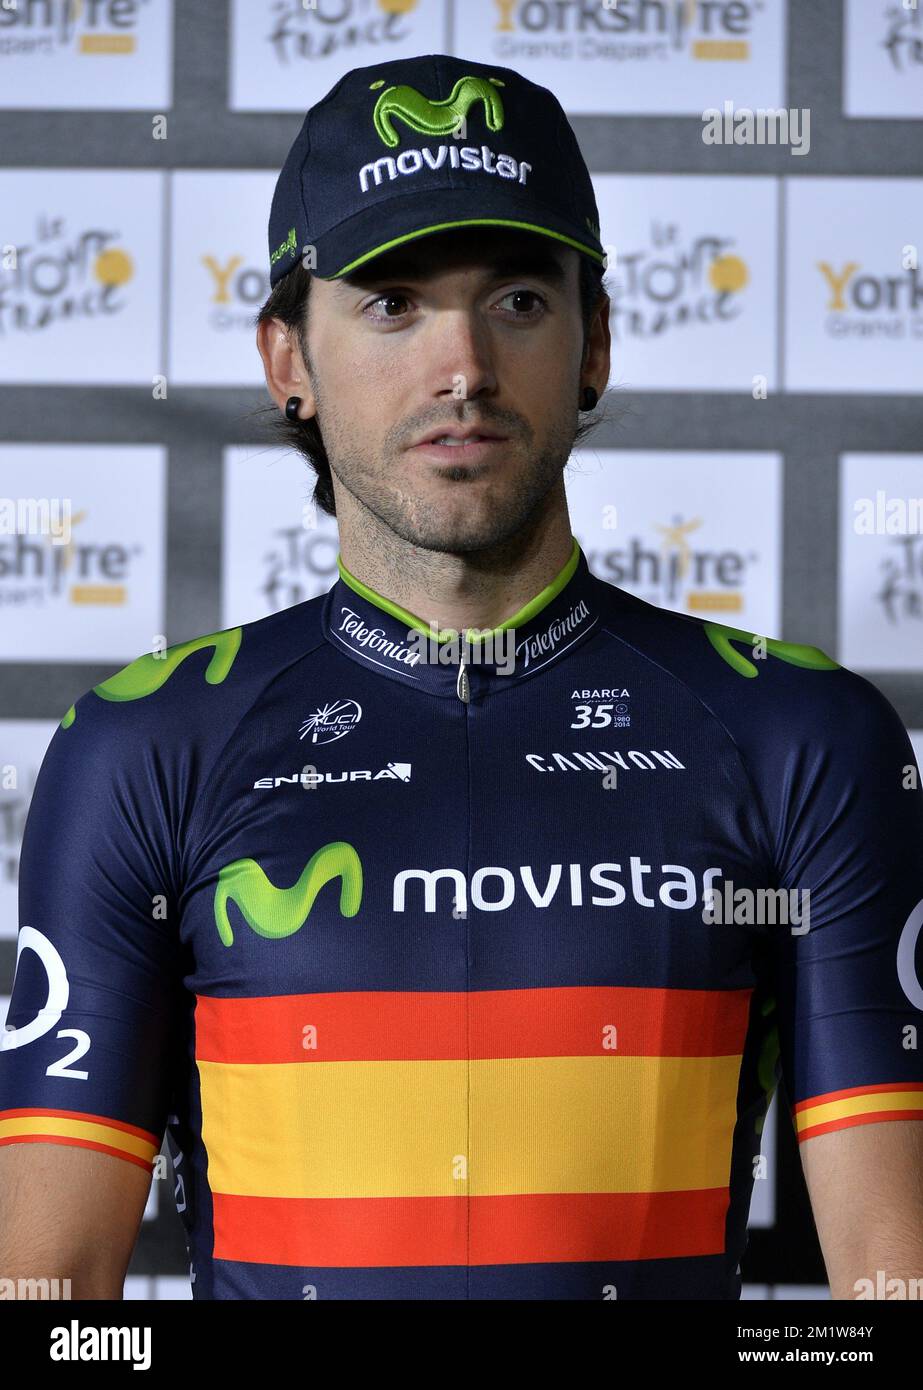 Spanish Jon Izagirre Insausti of Movistar Team pictured at the presentation  of the race, two days before the 'Grand Depart' of the 2014 edition of the  Tour de France cycling race, in